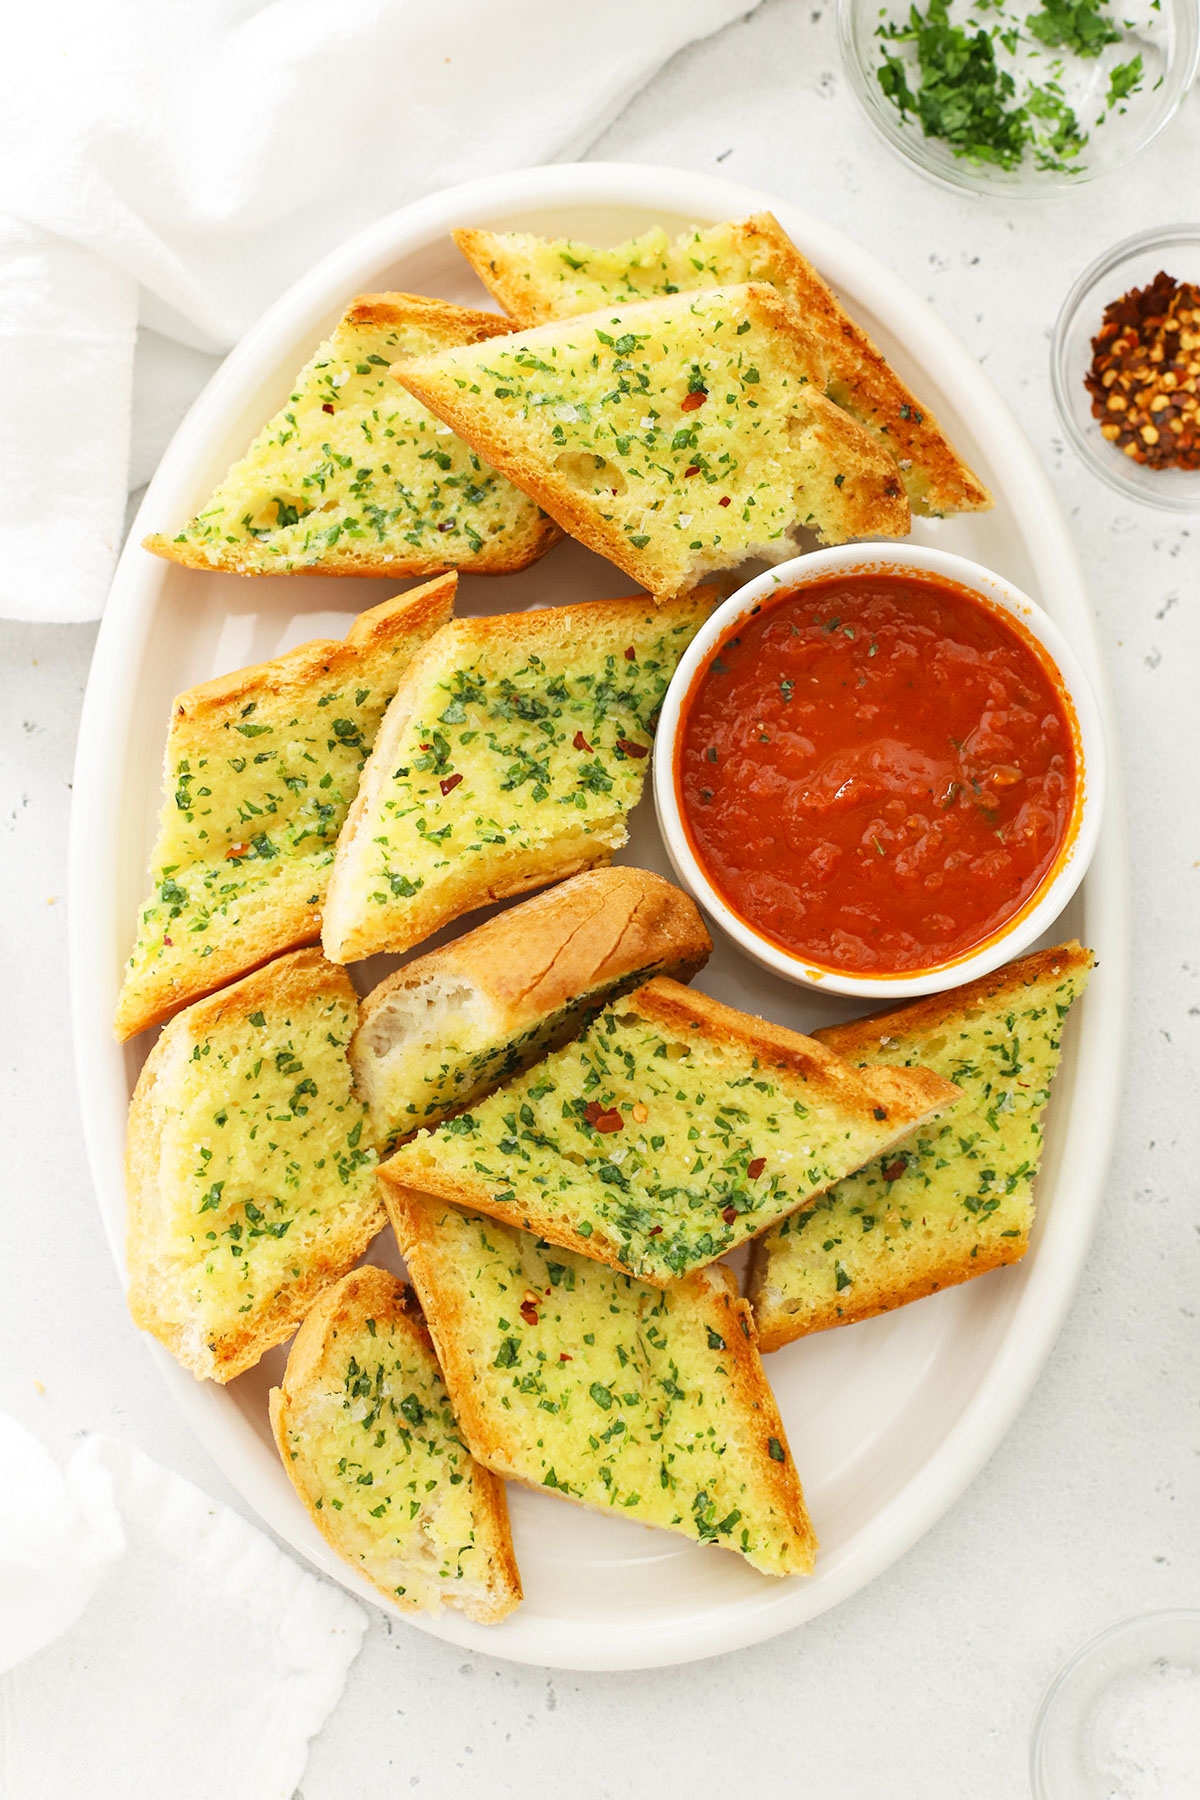 Overhead view of slices of garlic bread on a white platter with a bowl of marinara sauce